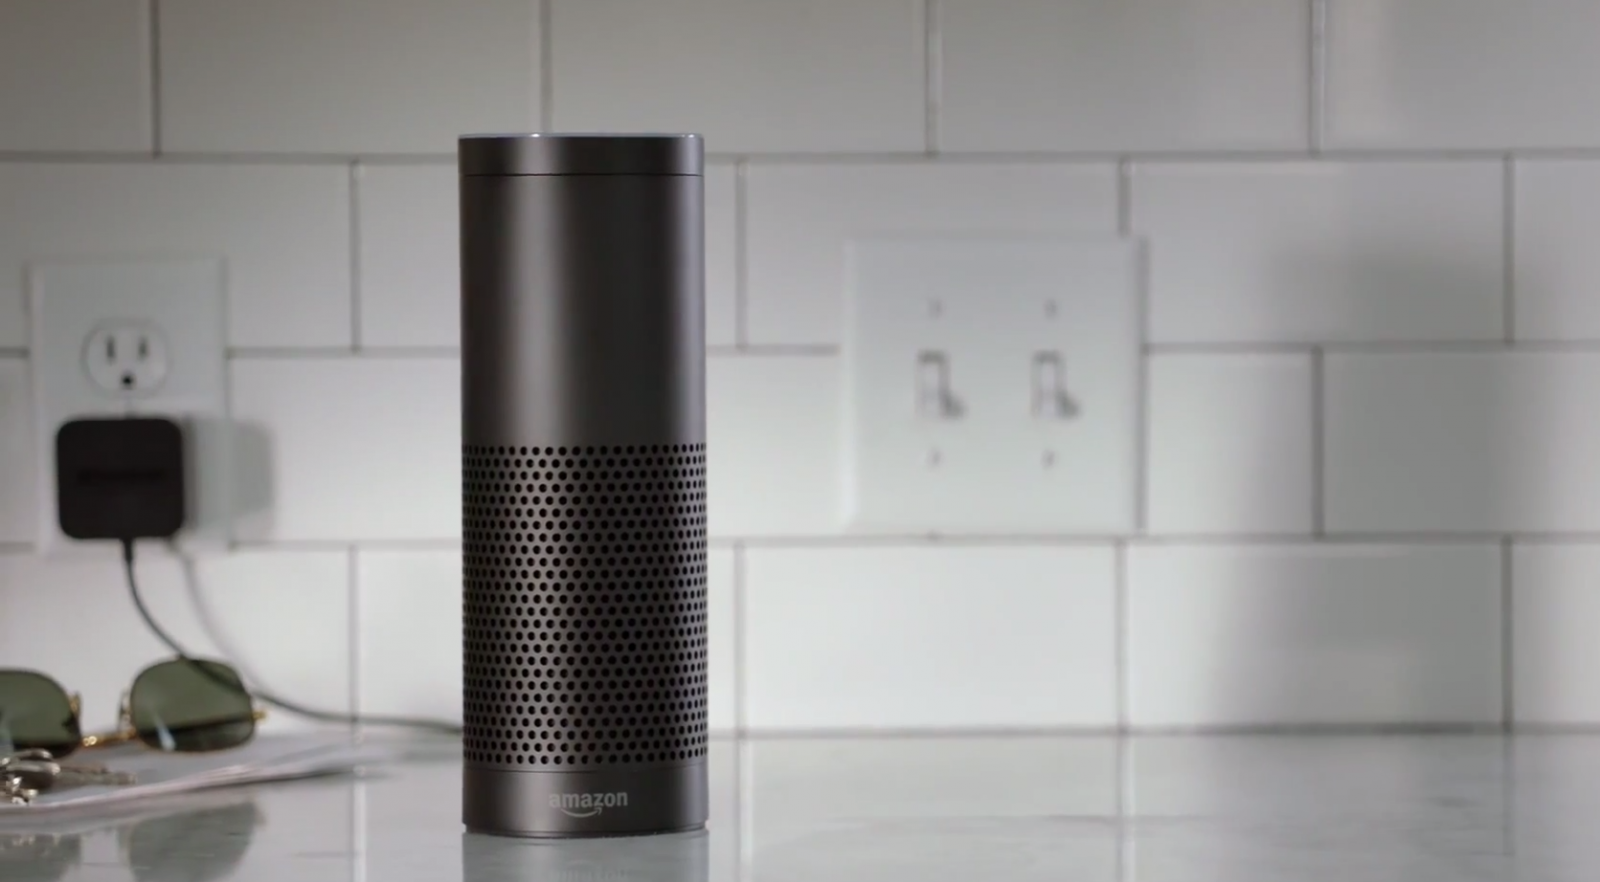 amazon-echo-keeps-you-up-on-the-times-while-spitting-mad-rhymes-image-cultofandroidcomwp-contentuploads201411Screen-Shot-2014-11-06-at-173652-png